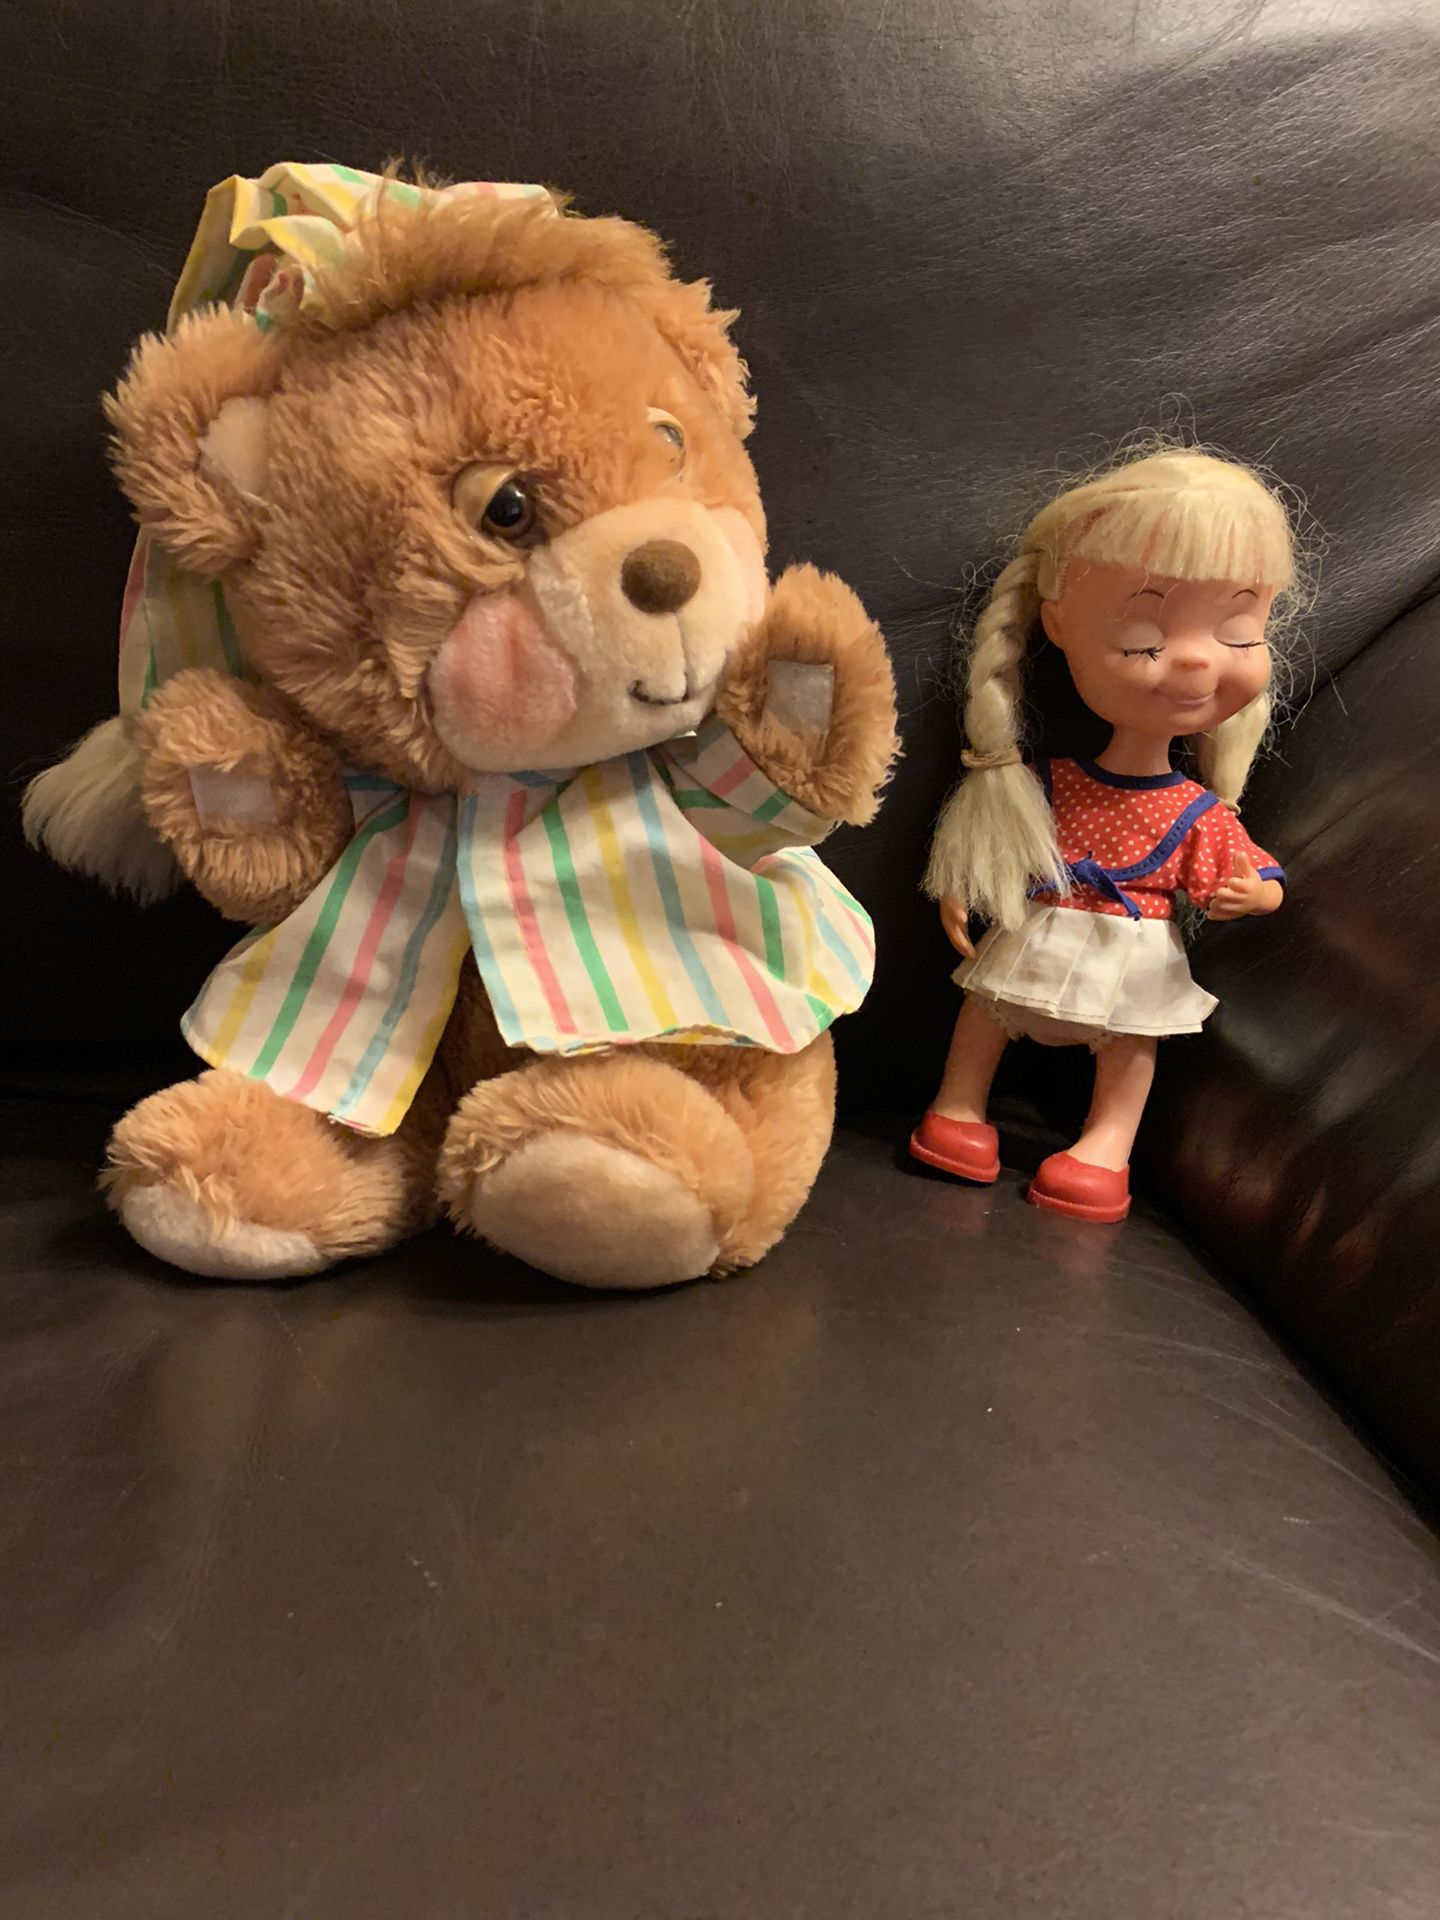 Last Chance - $5 for both - Sweet Doll and Teddy Bear